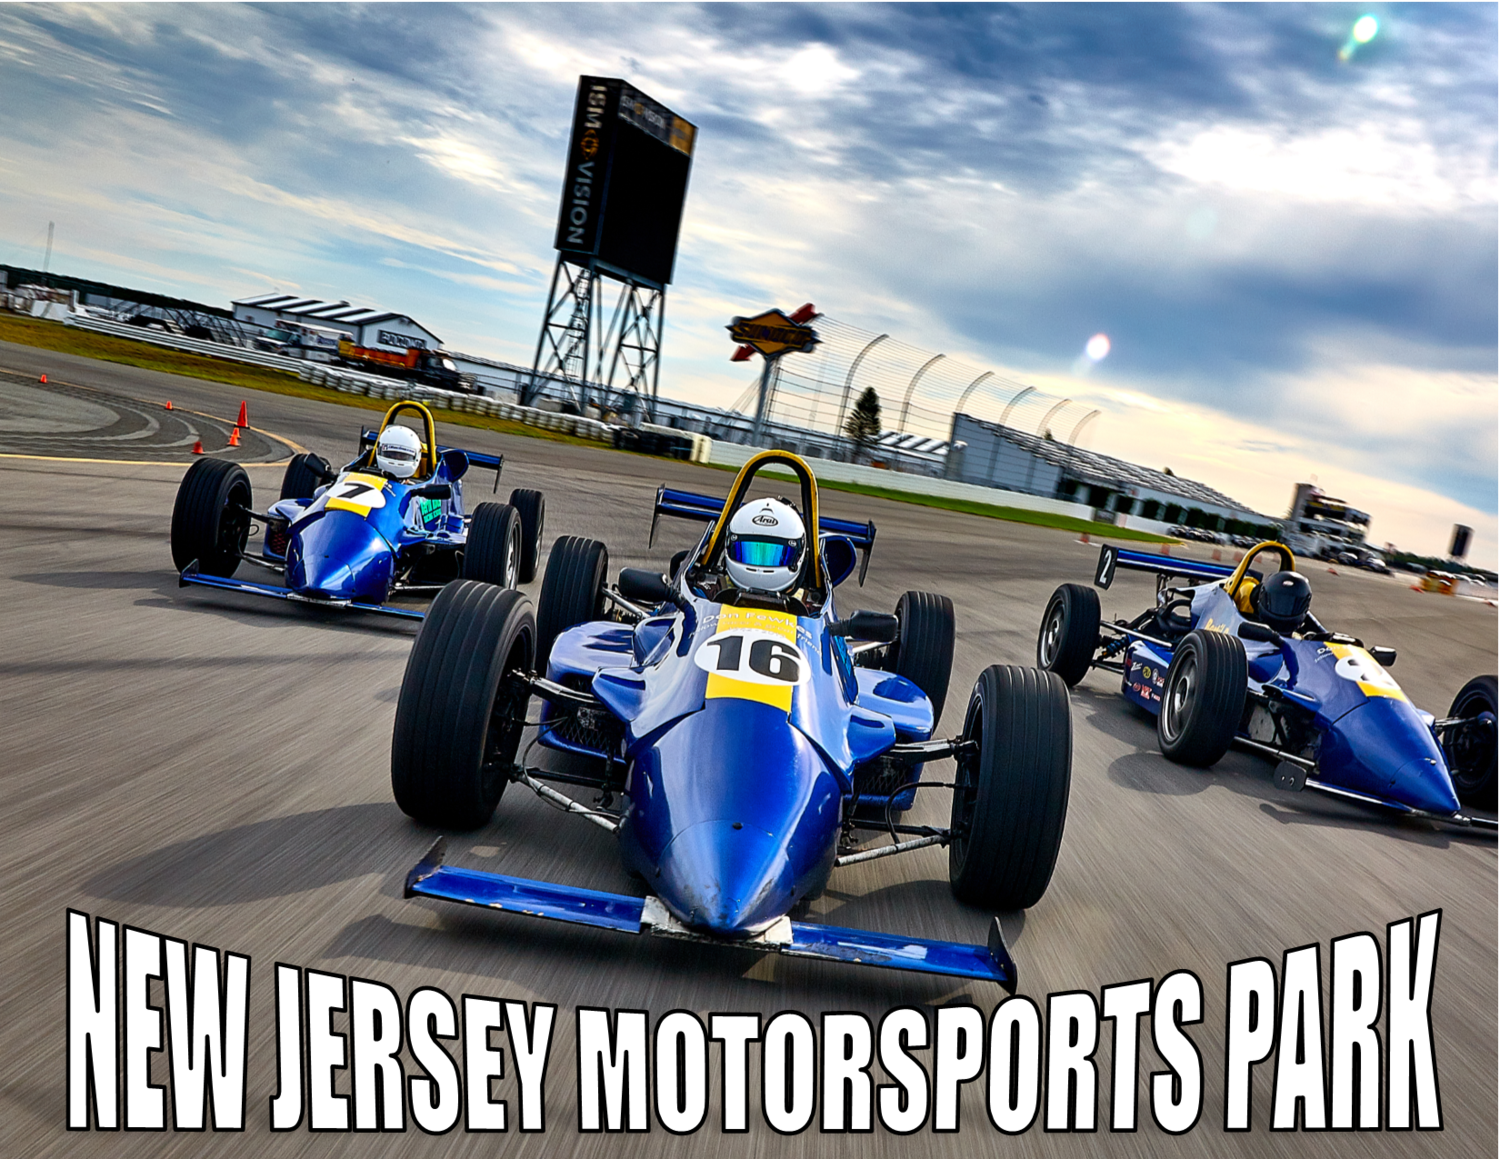 New Jersey Motorsports Park - 5 Day Road Racing Week